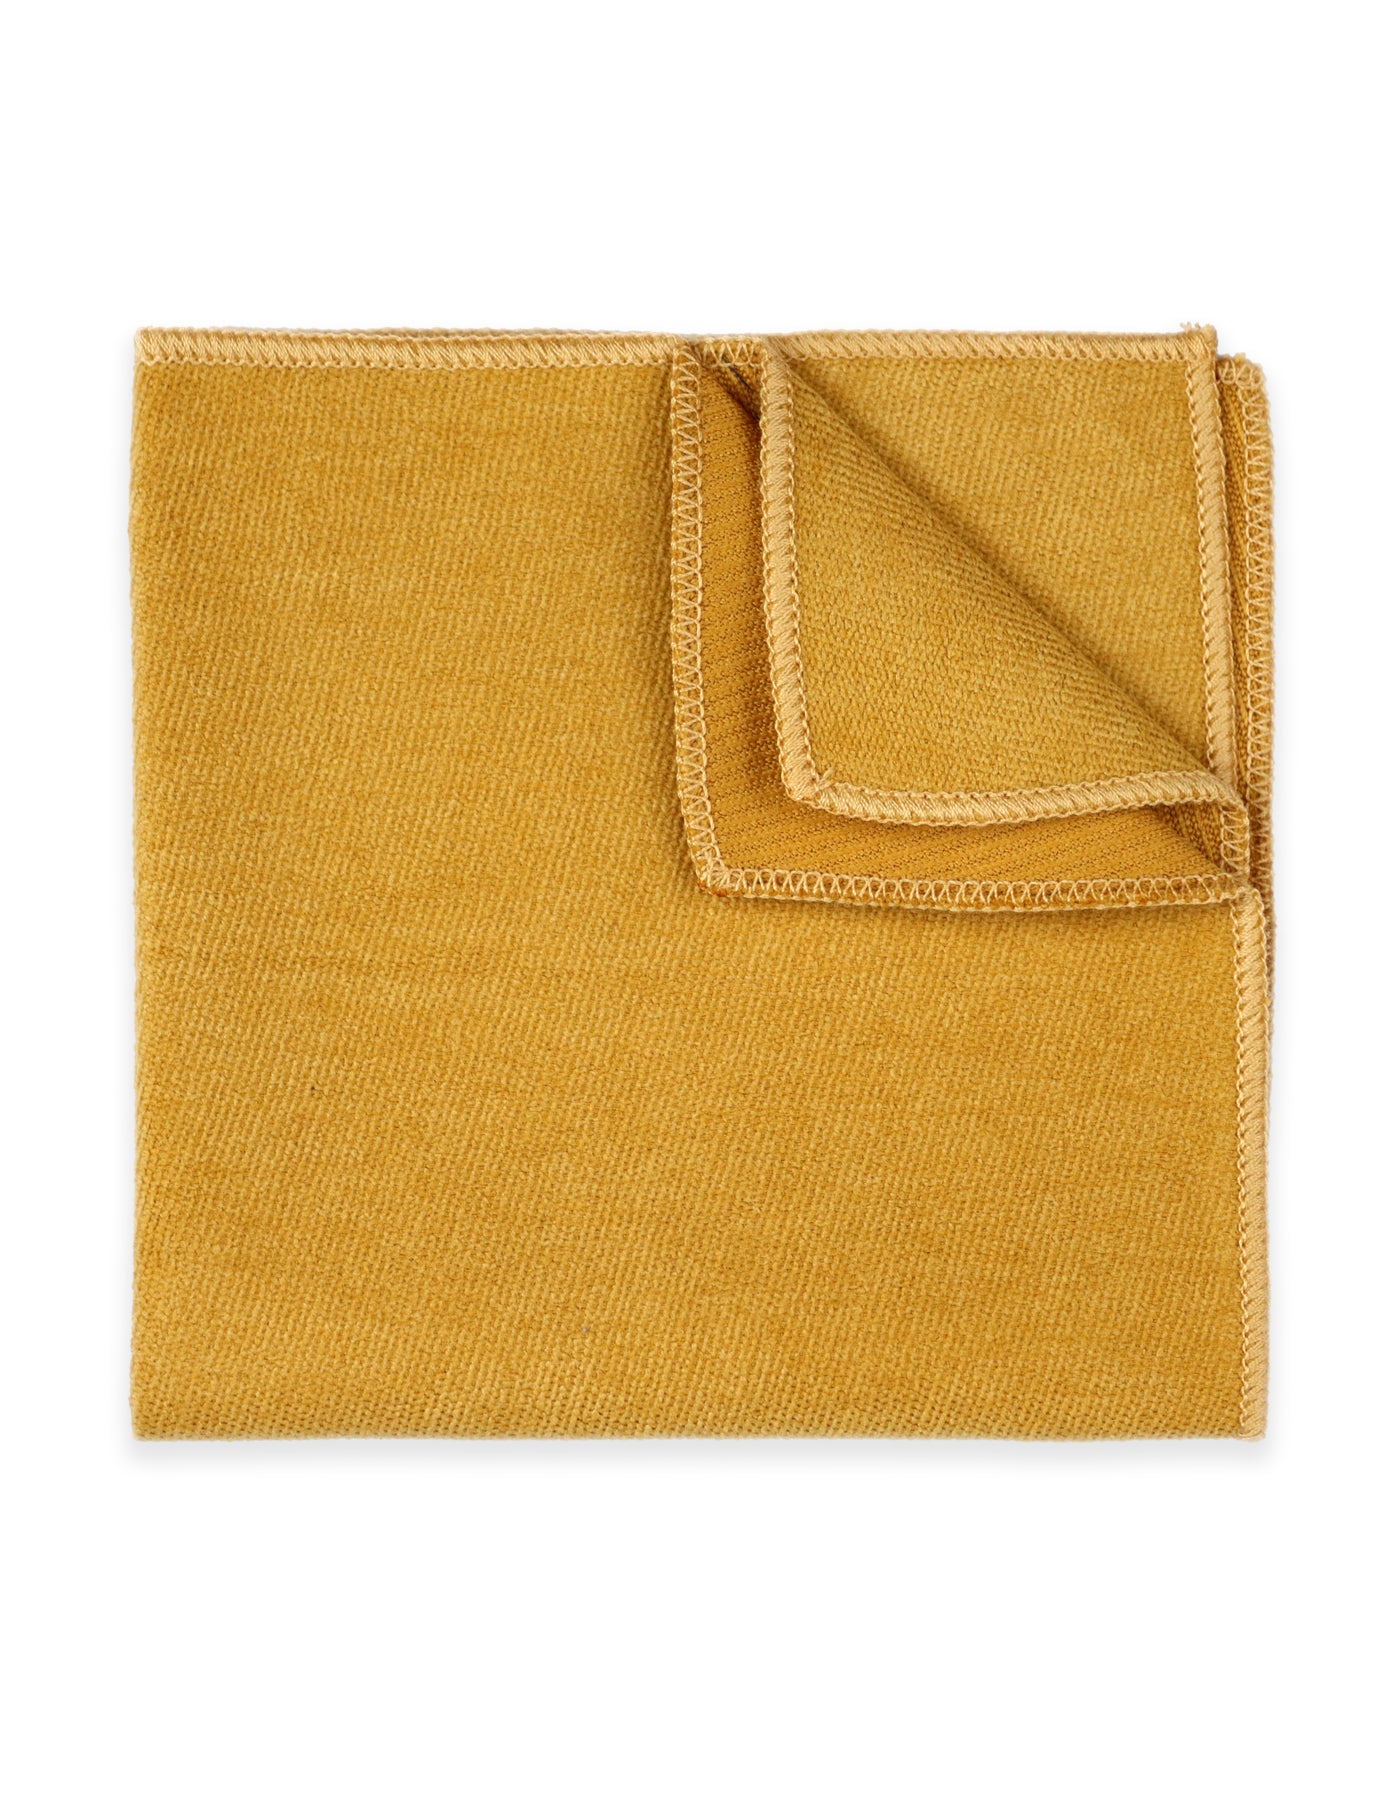 100% Brushed Cotton Suede Bow Tie - Mustard Yellow